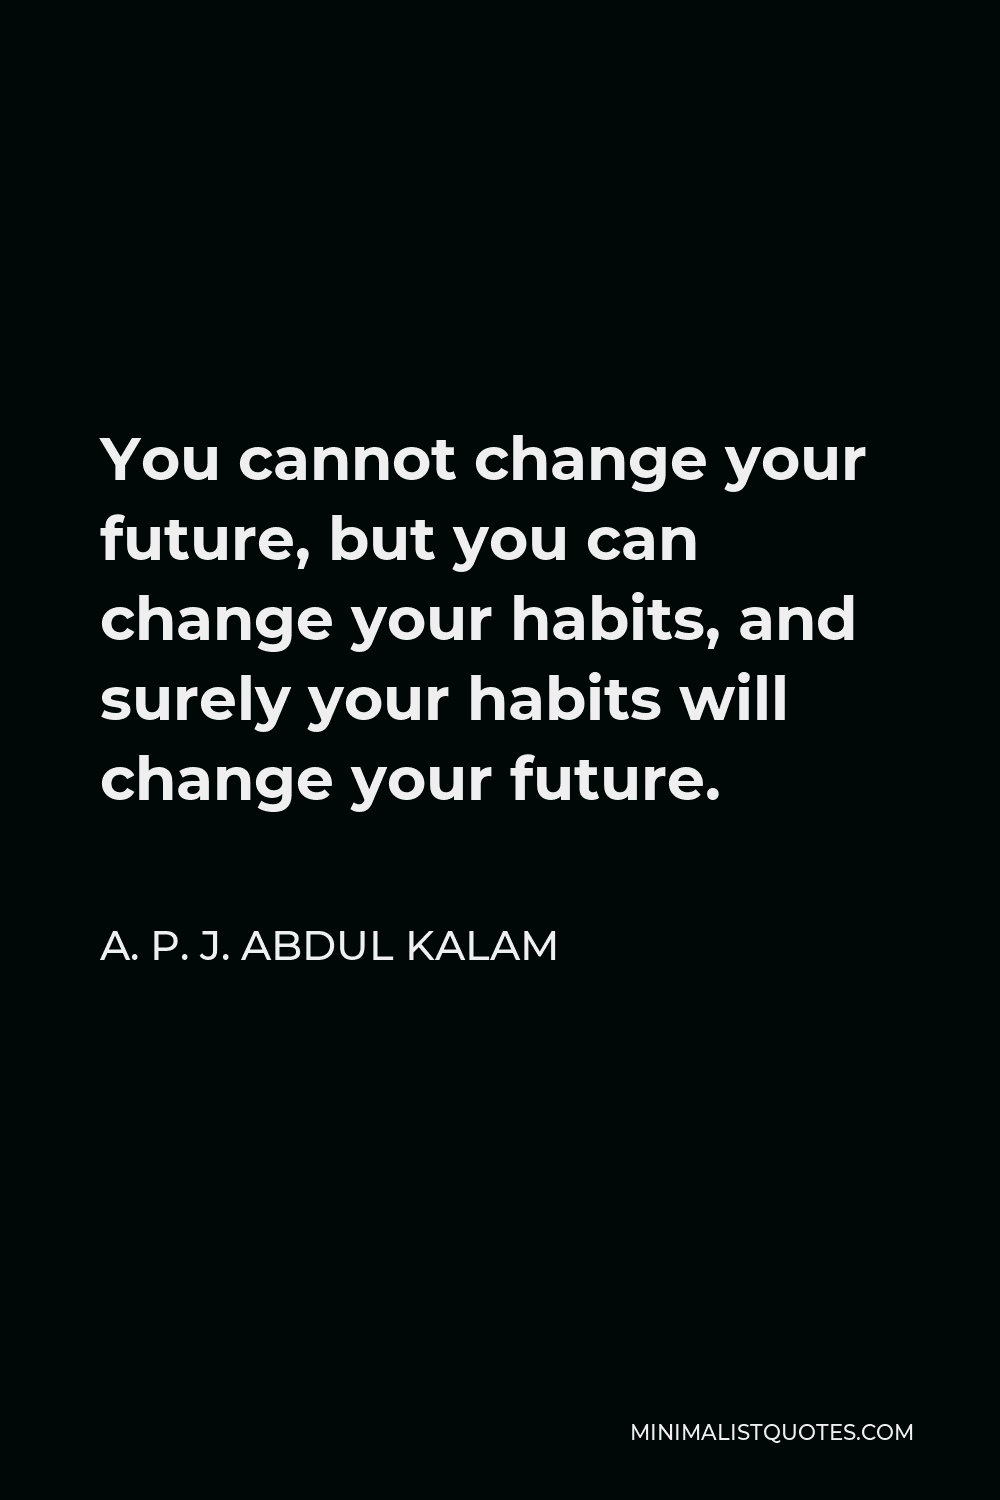 A. P. J. Abdul Kalam Quote - You cannot change your future, but you can change your habits, and surely your habits will change your future.